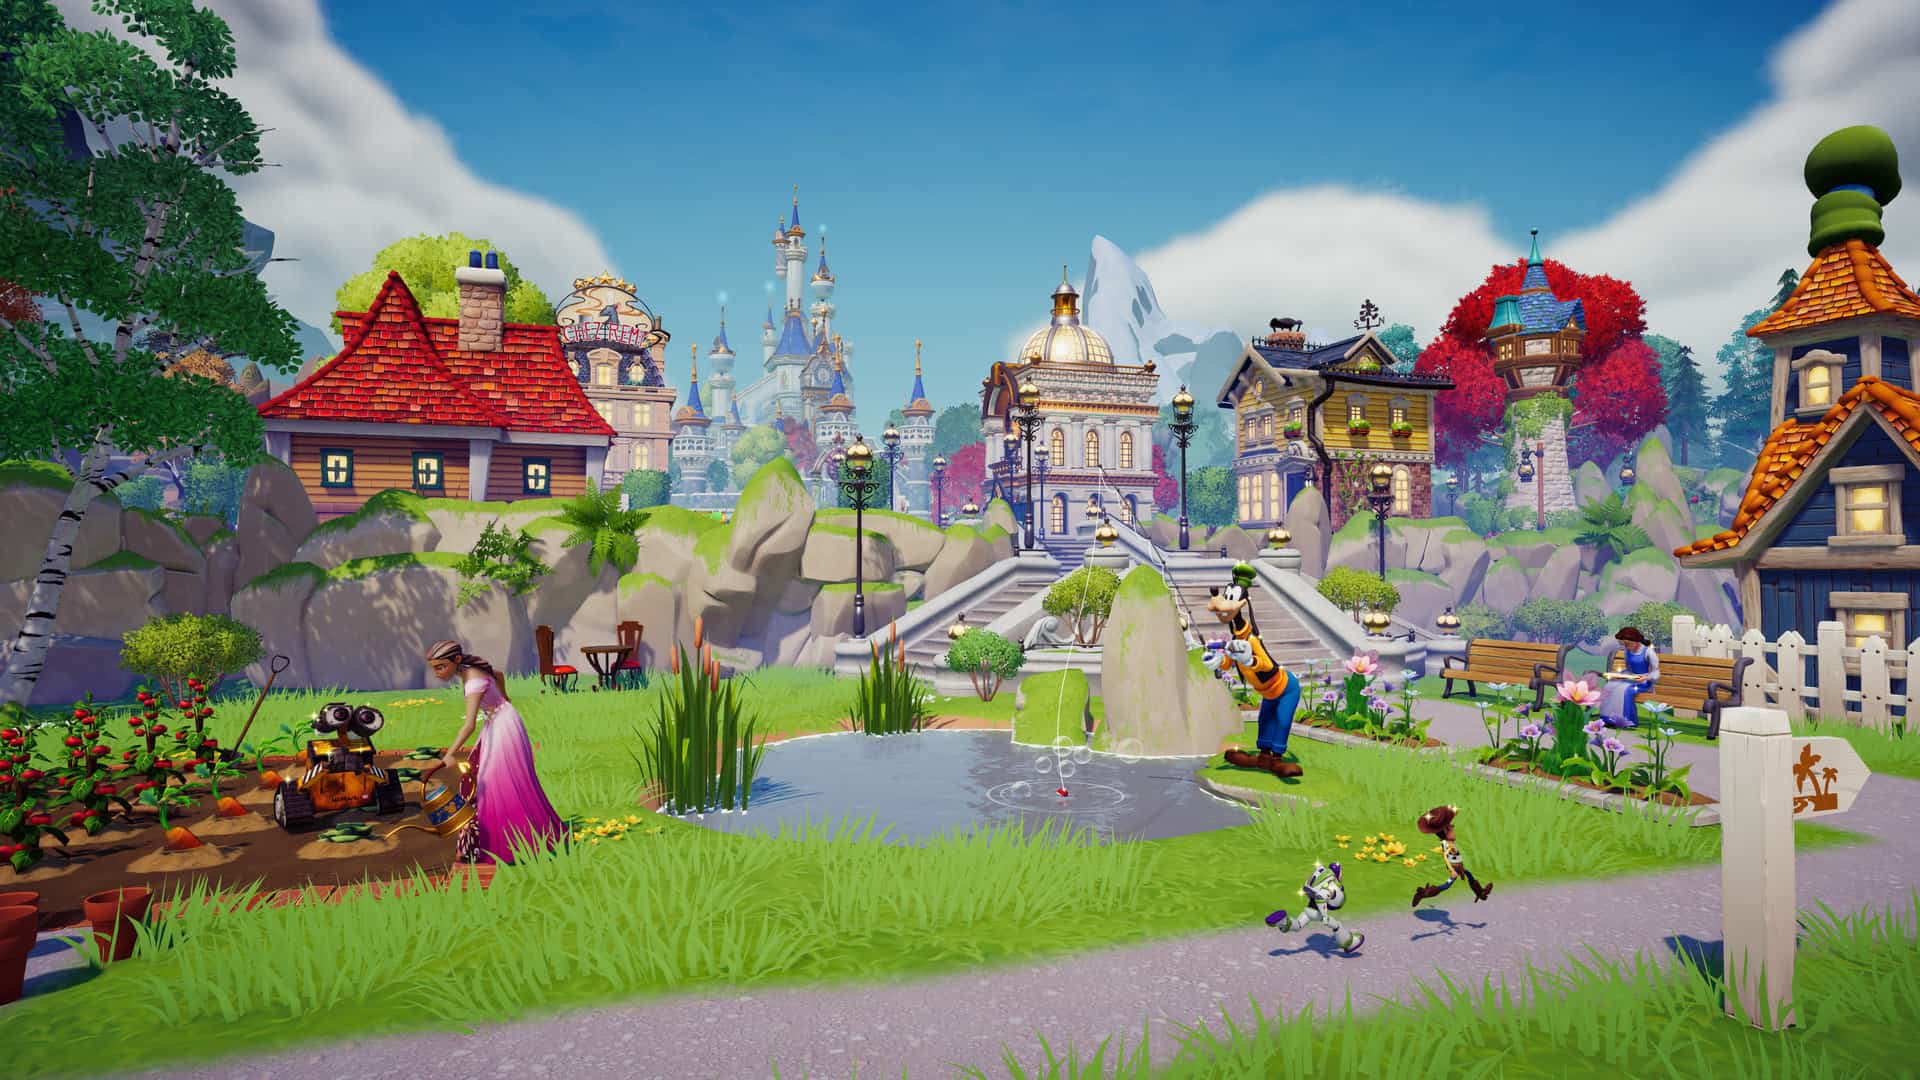 Disney Dreamlight Valley gets a new gameplay trailer